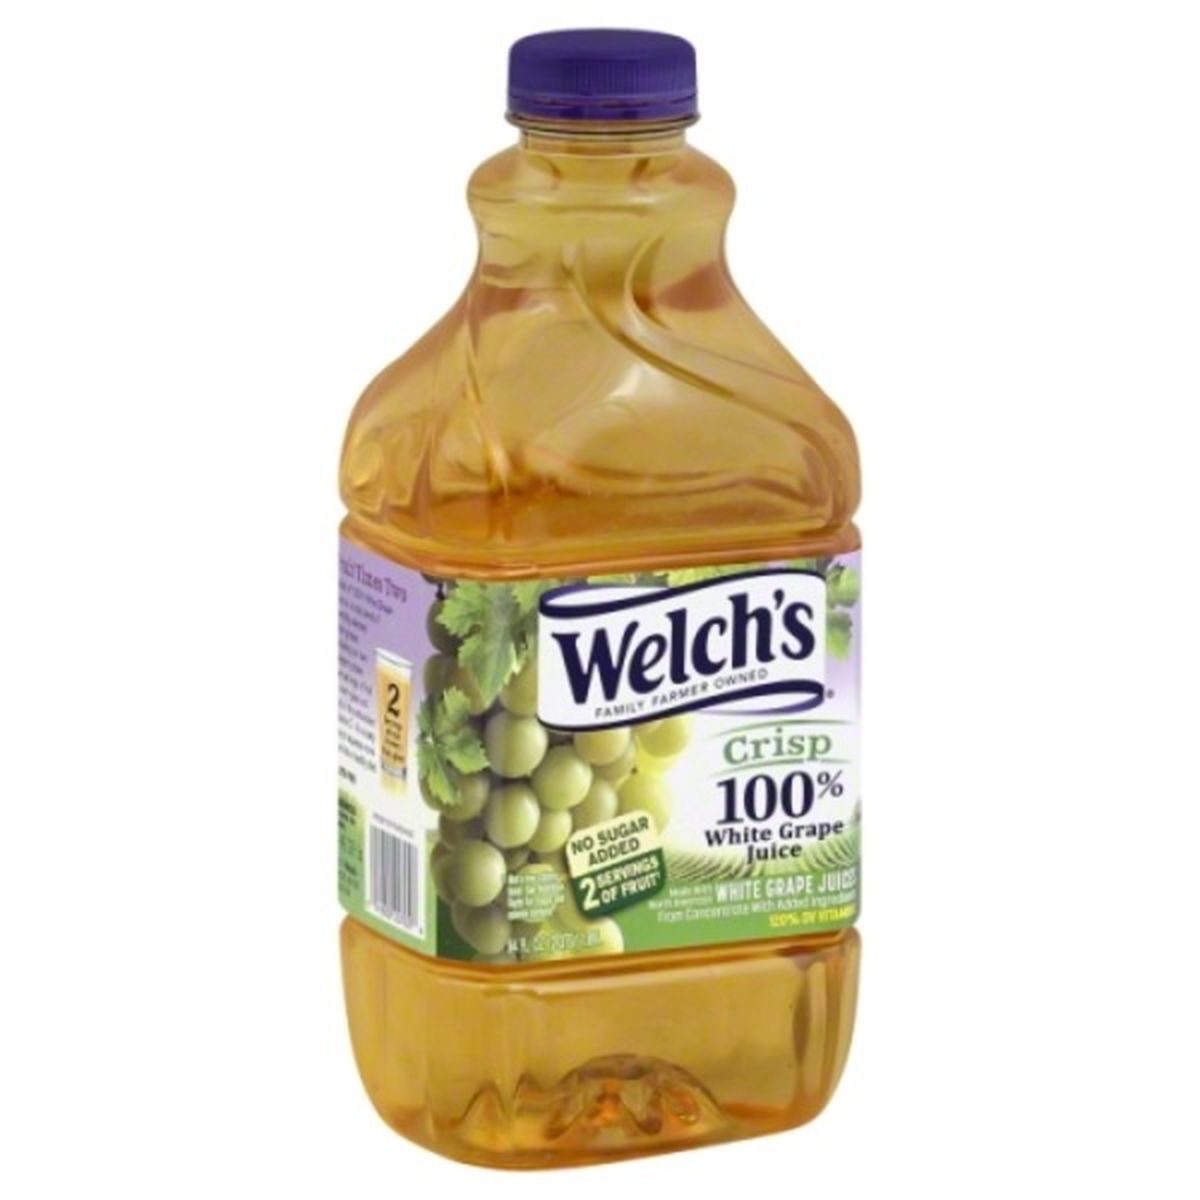 Calories in Welch's 100% Juice, White Grape